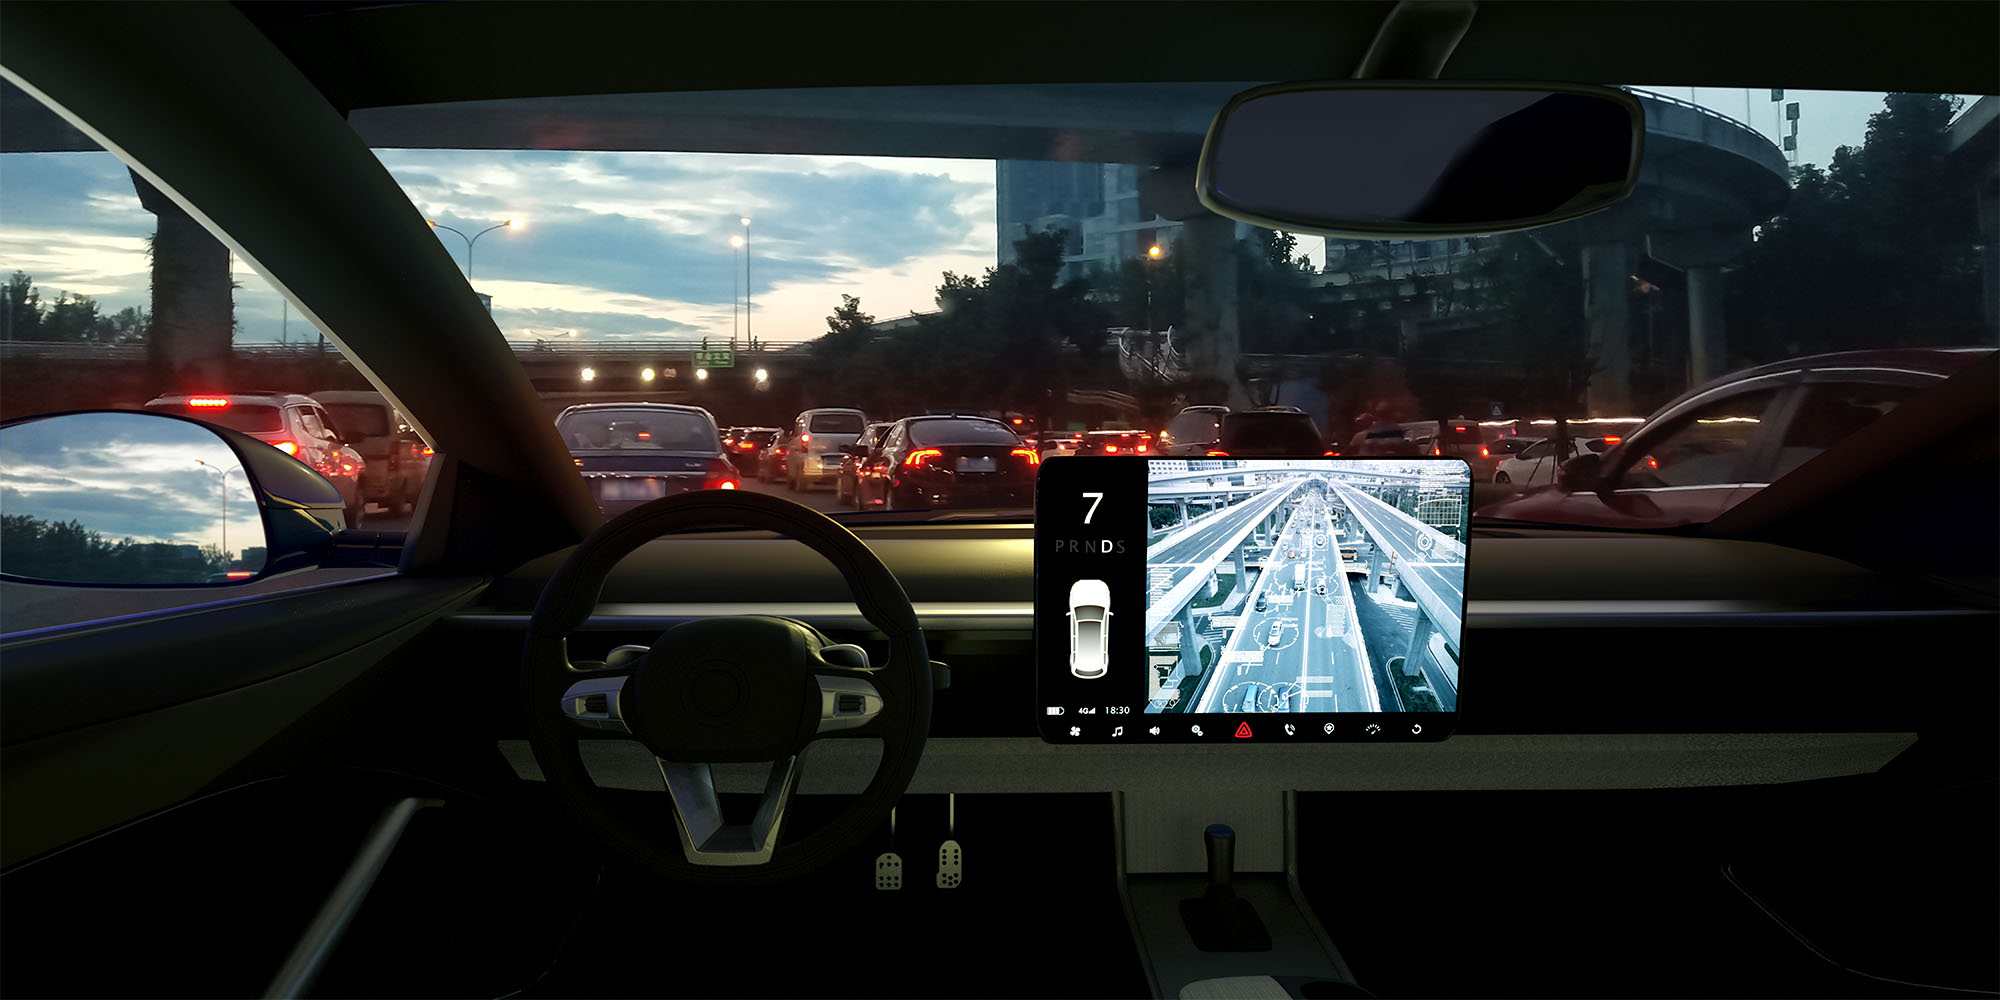 View from inside self driving car, overlooking traffic and onboard screen